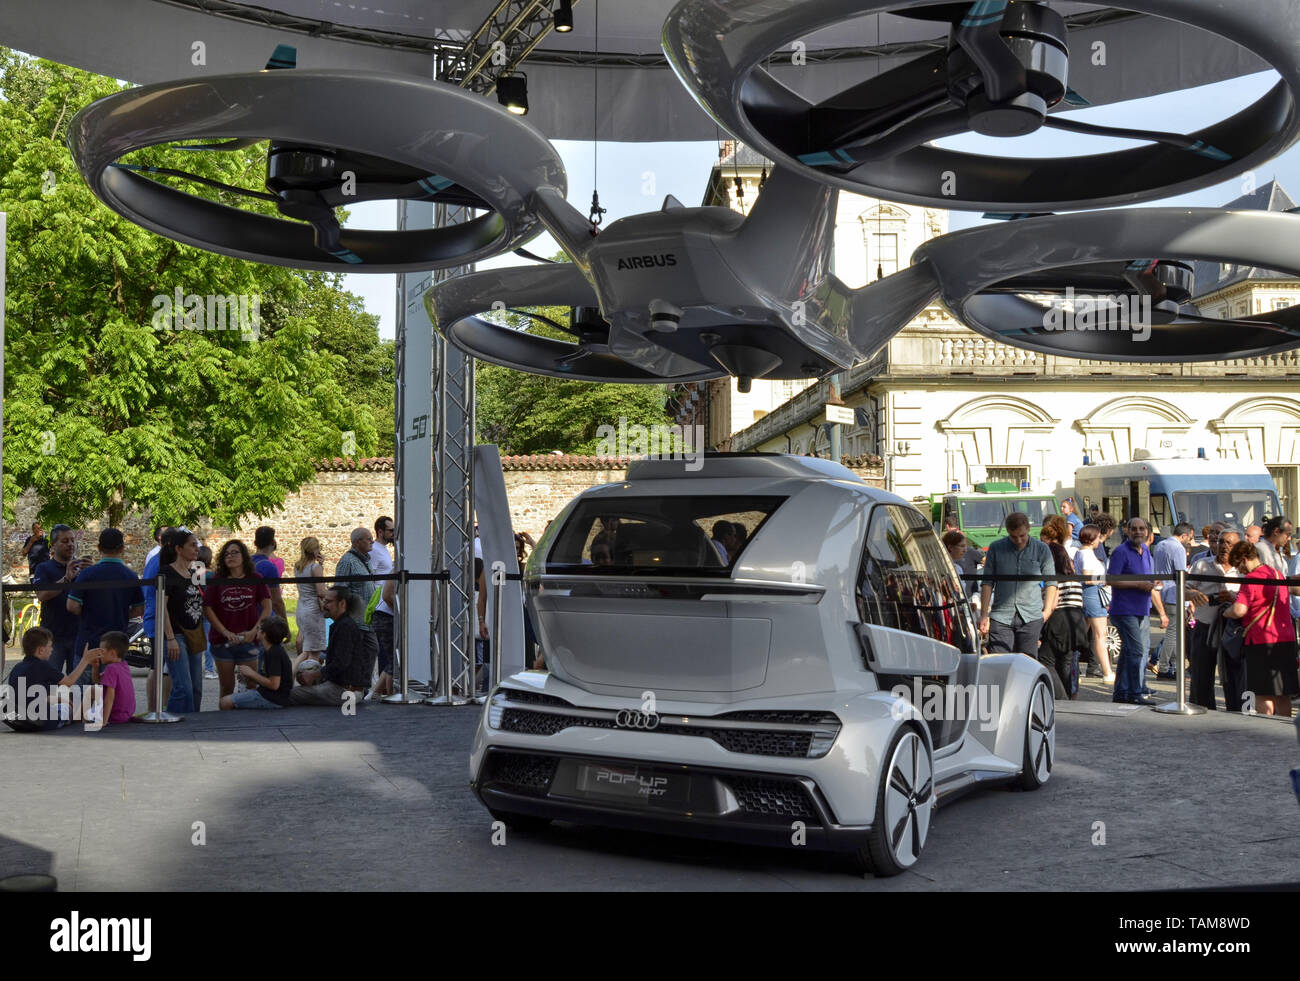 Turin, Piemonte, Italy. June 2018. Fully electric modular system resulting from the collaboration between Audi Airbus and Italdesign. Land and air veh Stock Photo